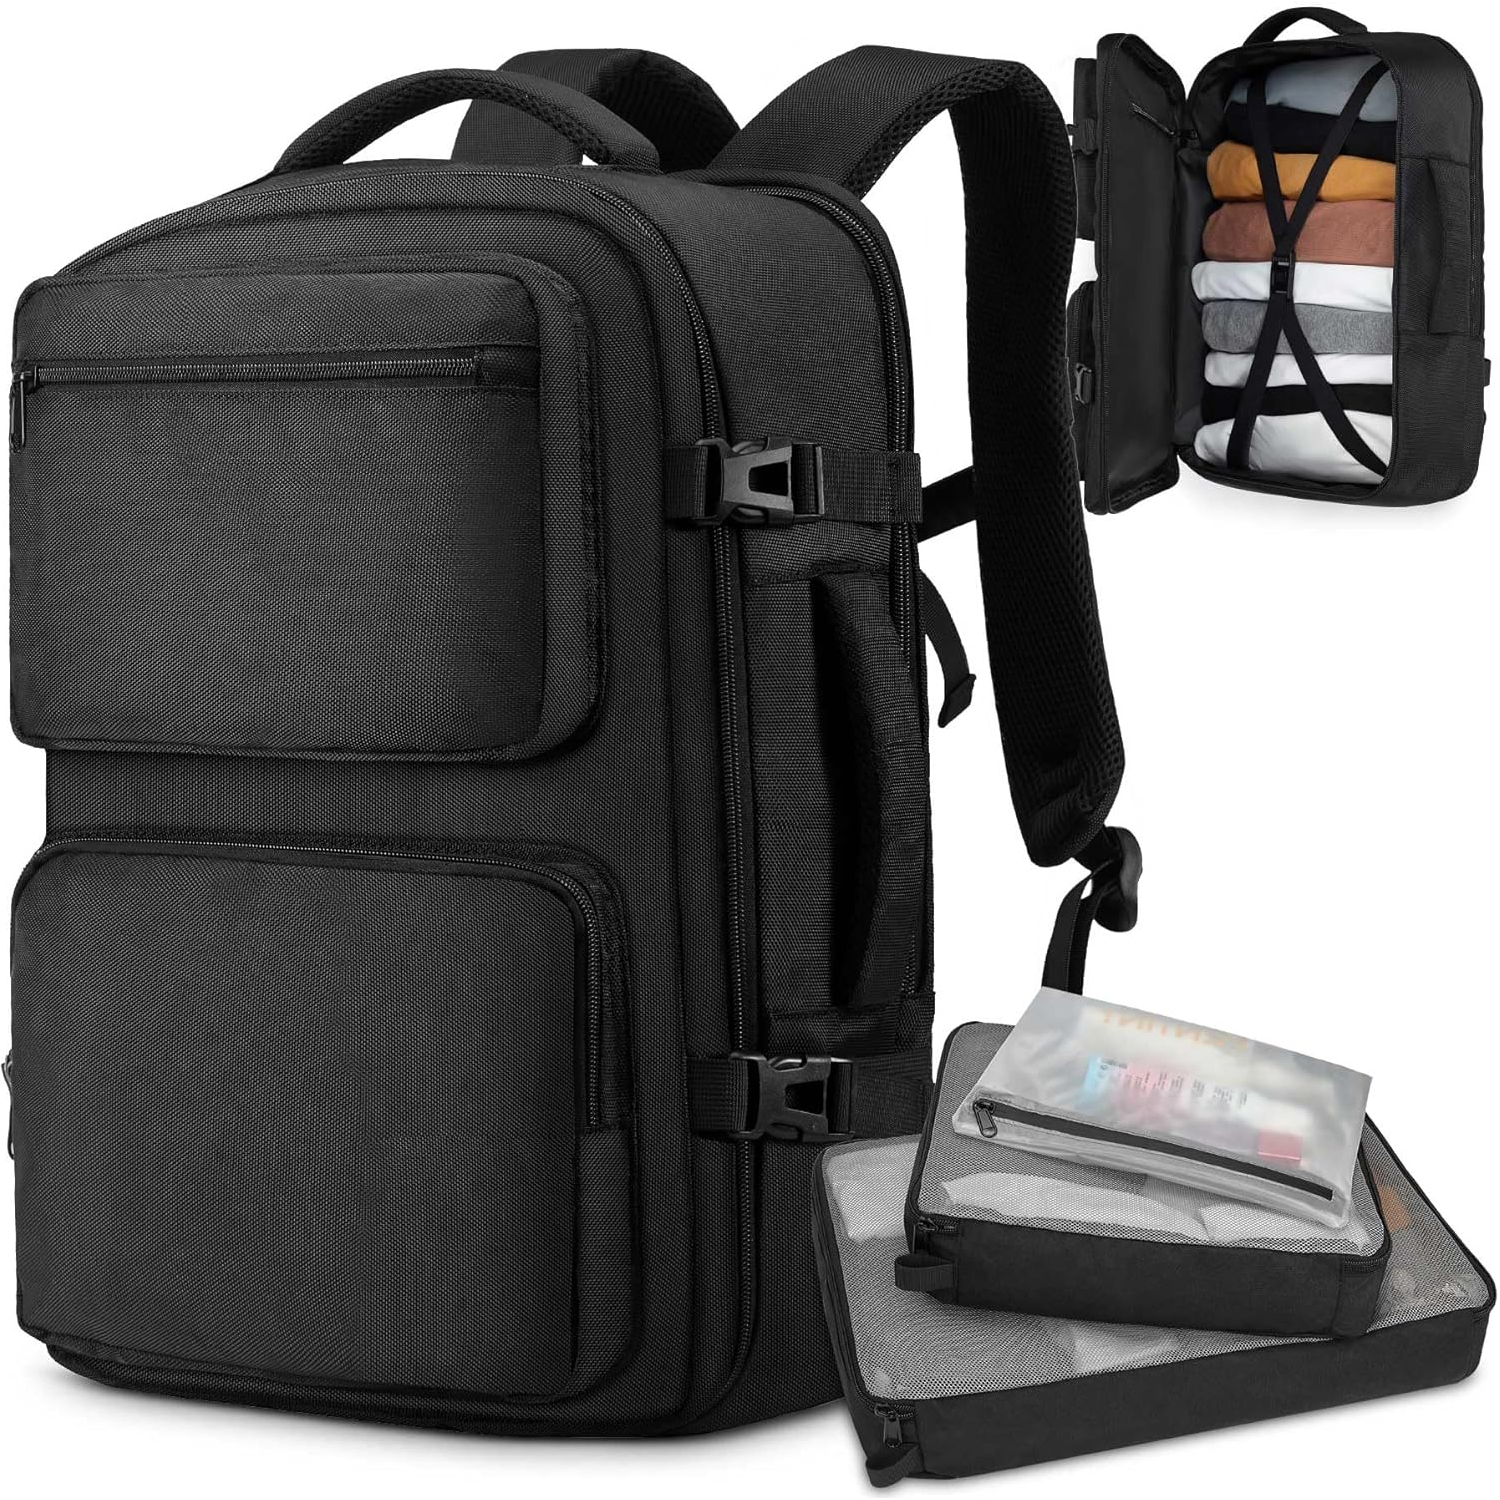 Luggage Backpack with 3 Packing Cubes Laptop Backpack Black